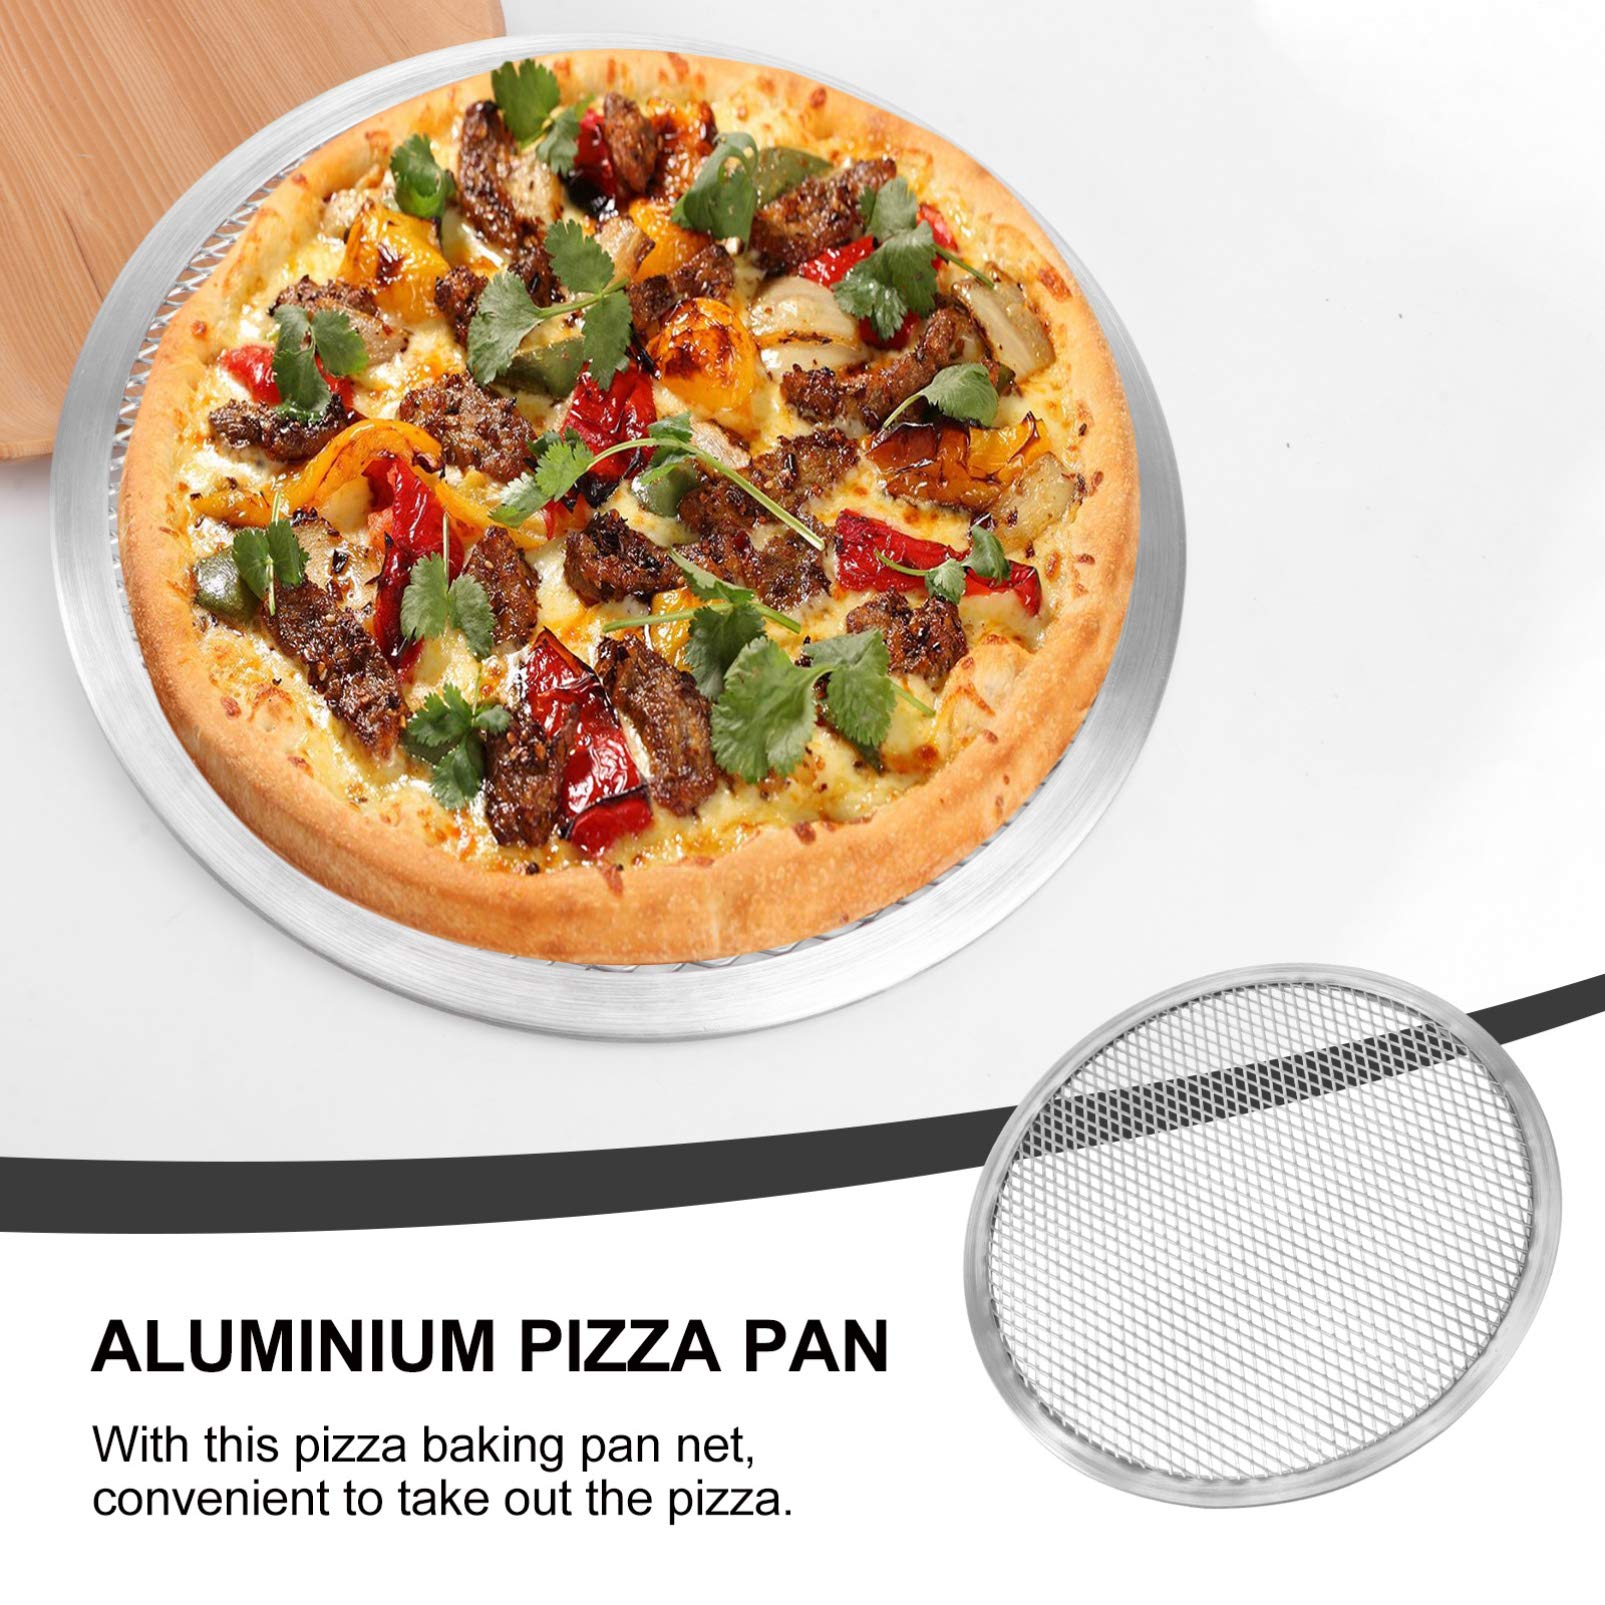 BESTonZON Pizza Pan, 16 Inch Pizza Tray with Holes, Seamless Aluminum Pizza Screen, Non Stick Mesh Net Baking Tray Cookware Kitchen Tool For Oven, BBQ, Kitchen Restaurant